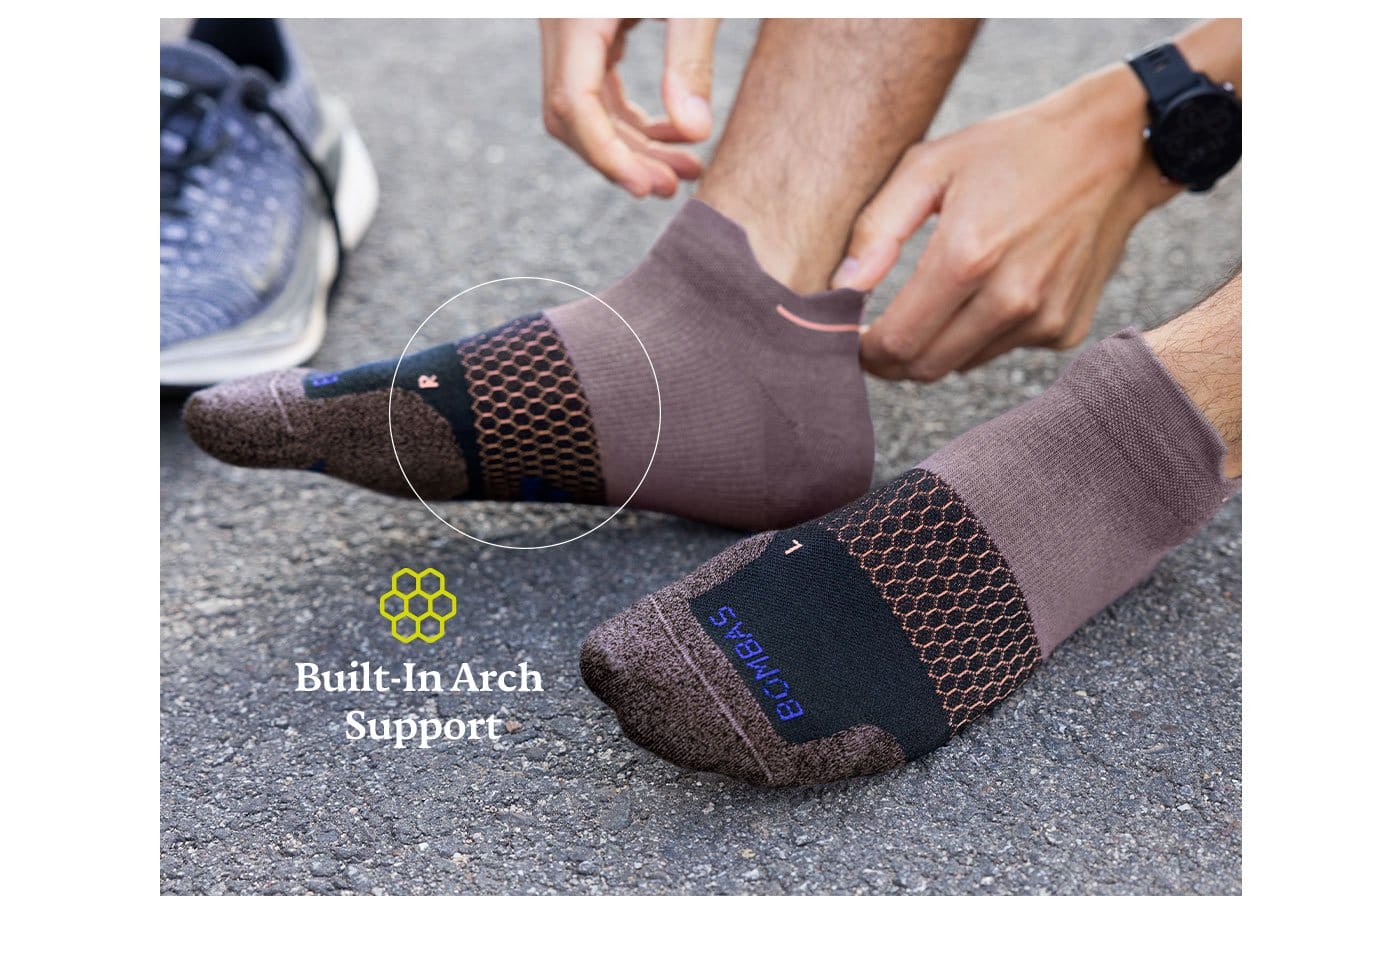 Built-In Arch Support